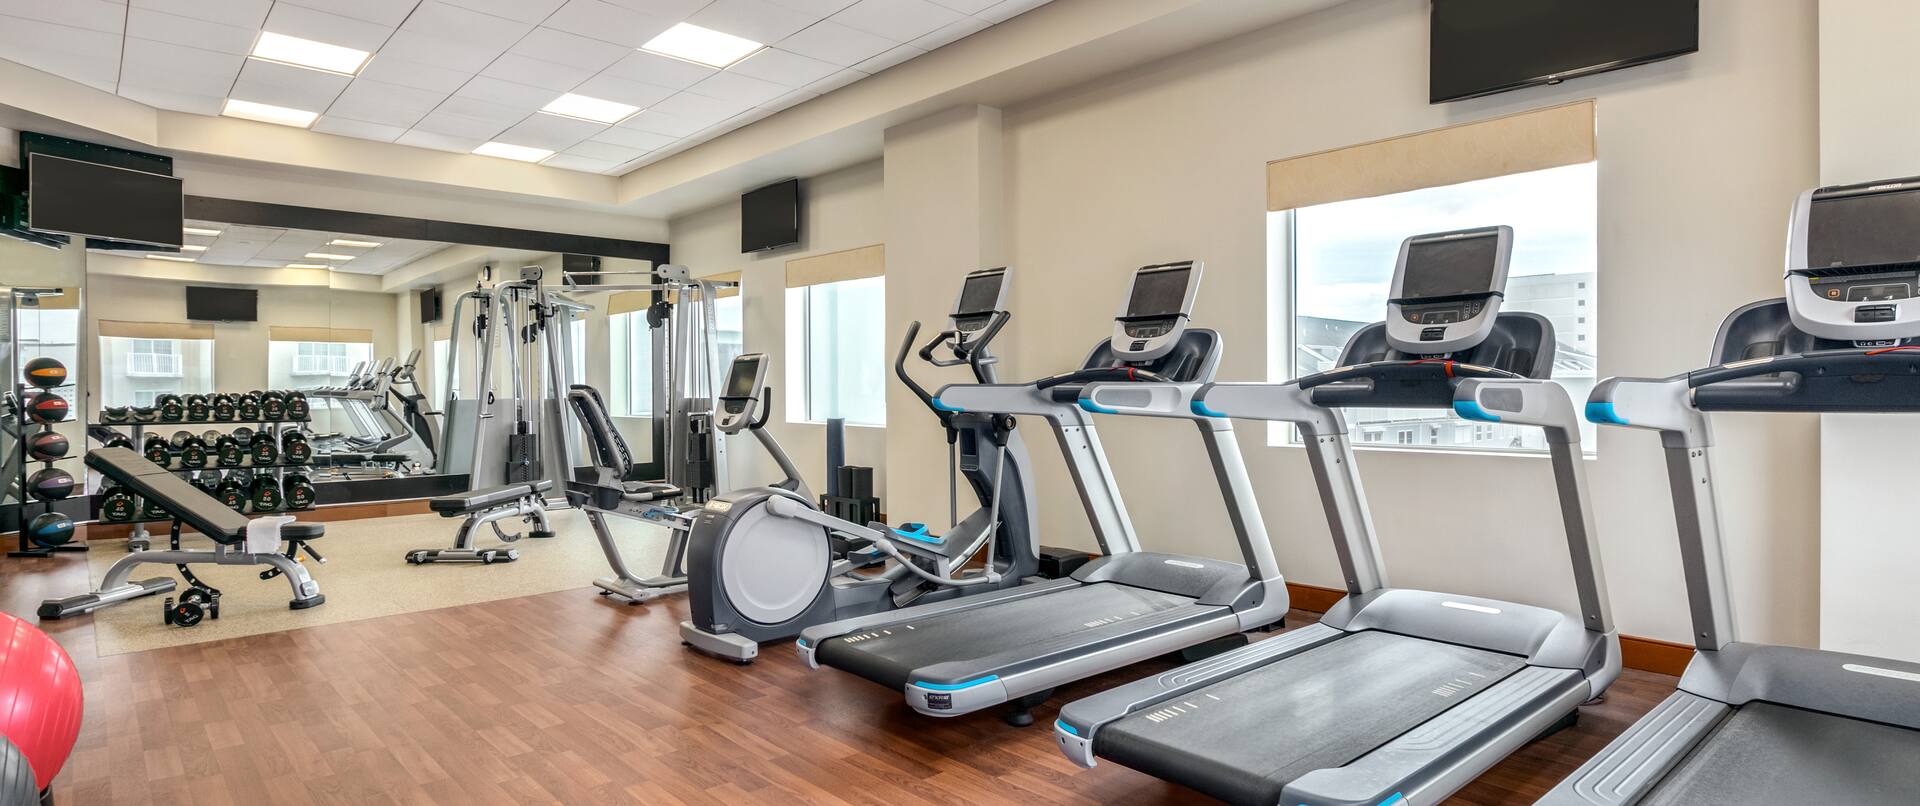 Treadmills Recumbent Bikes and Weights in Fitness Center